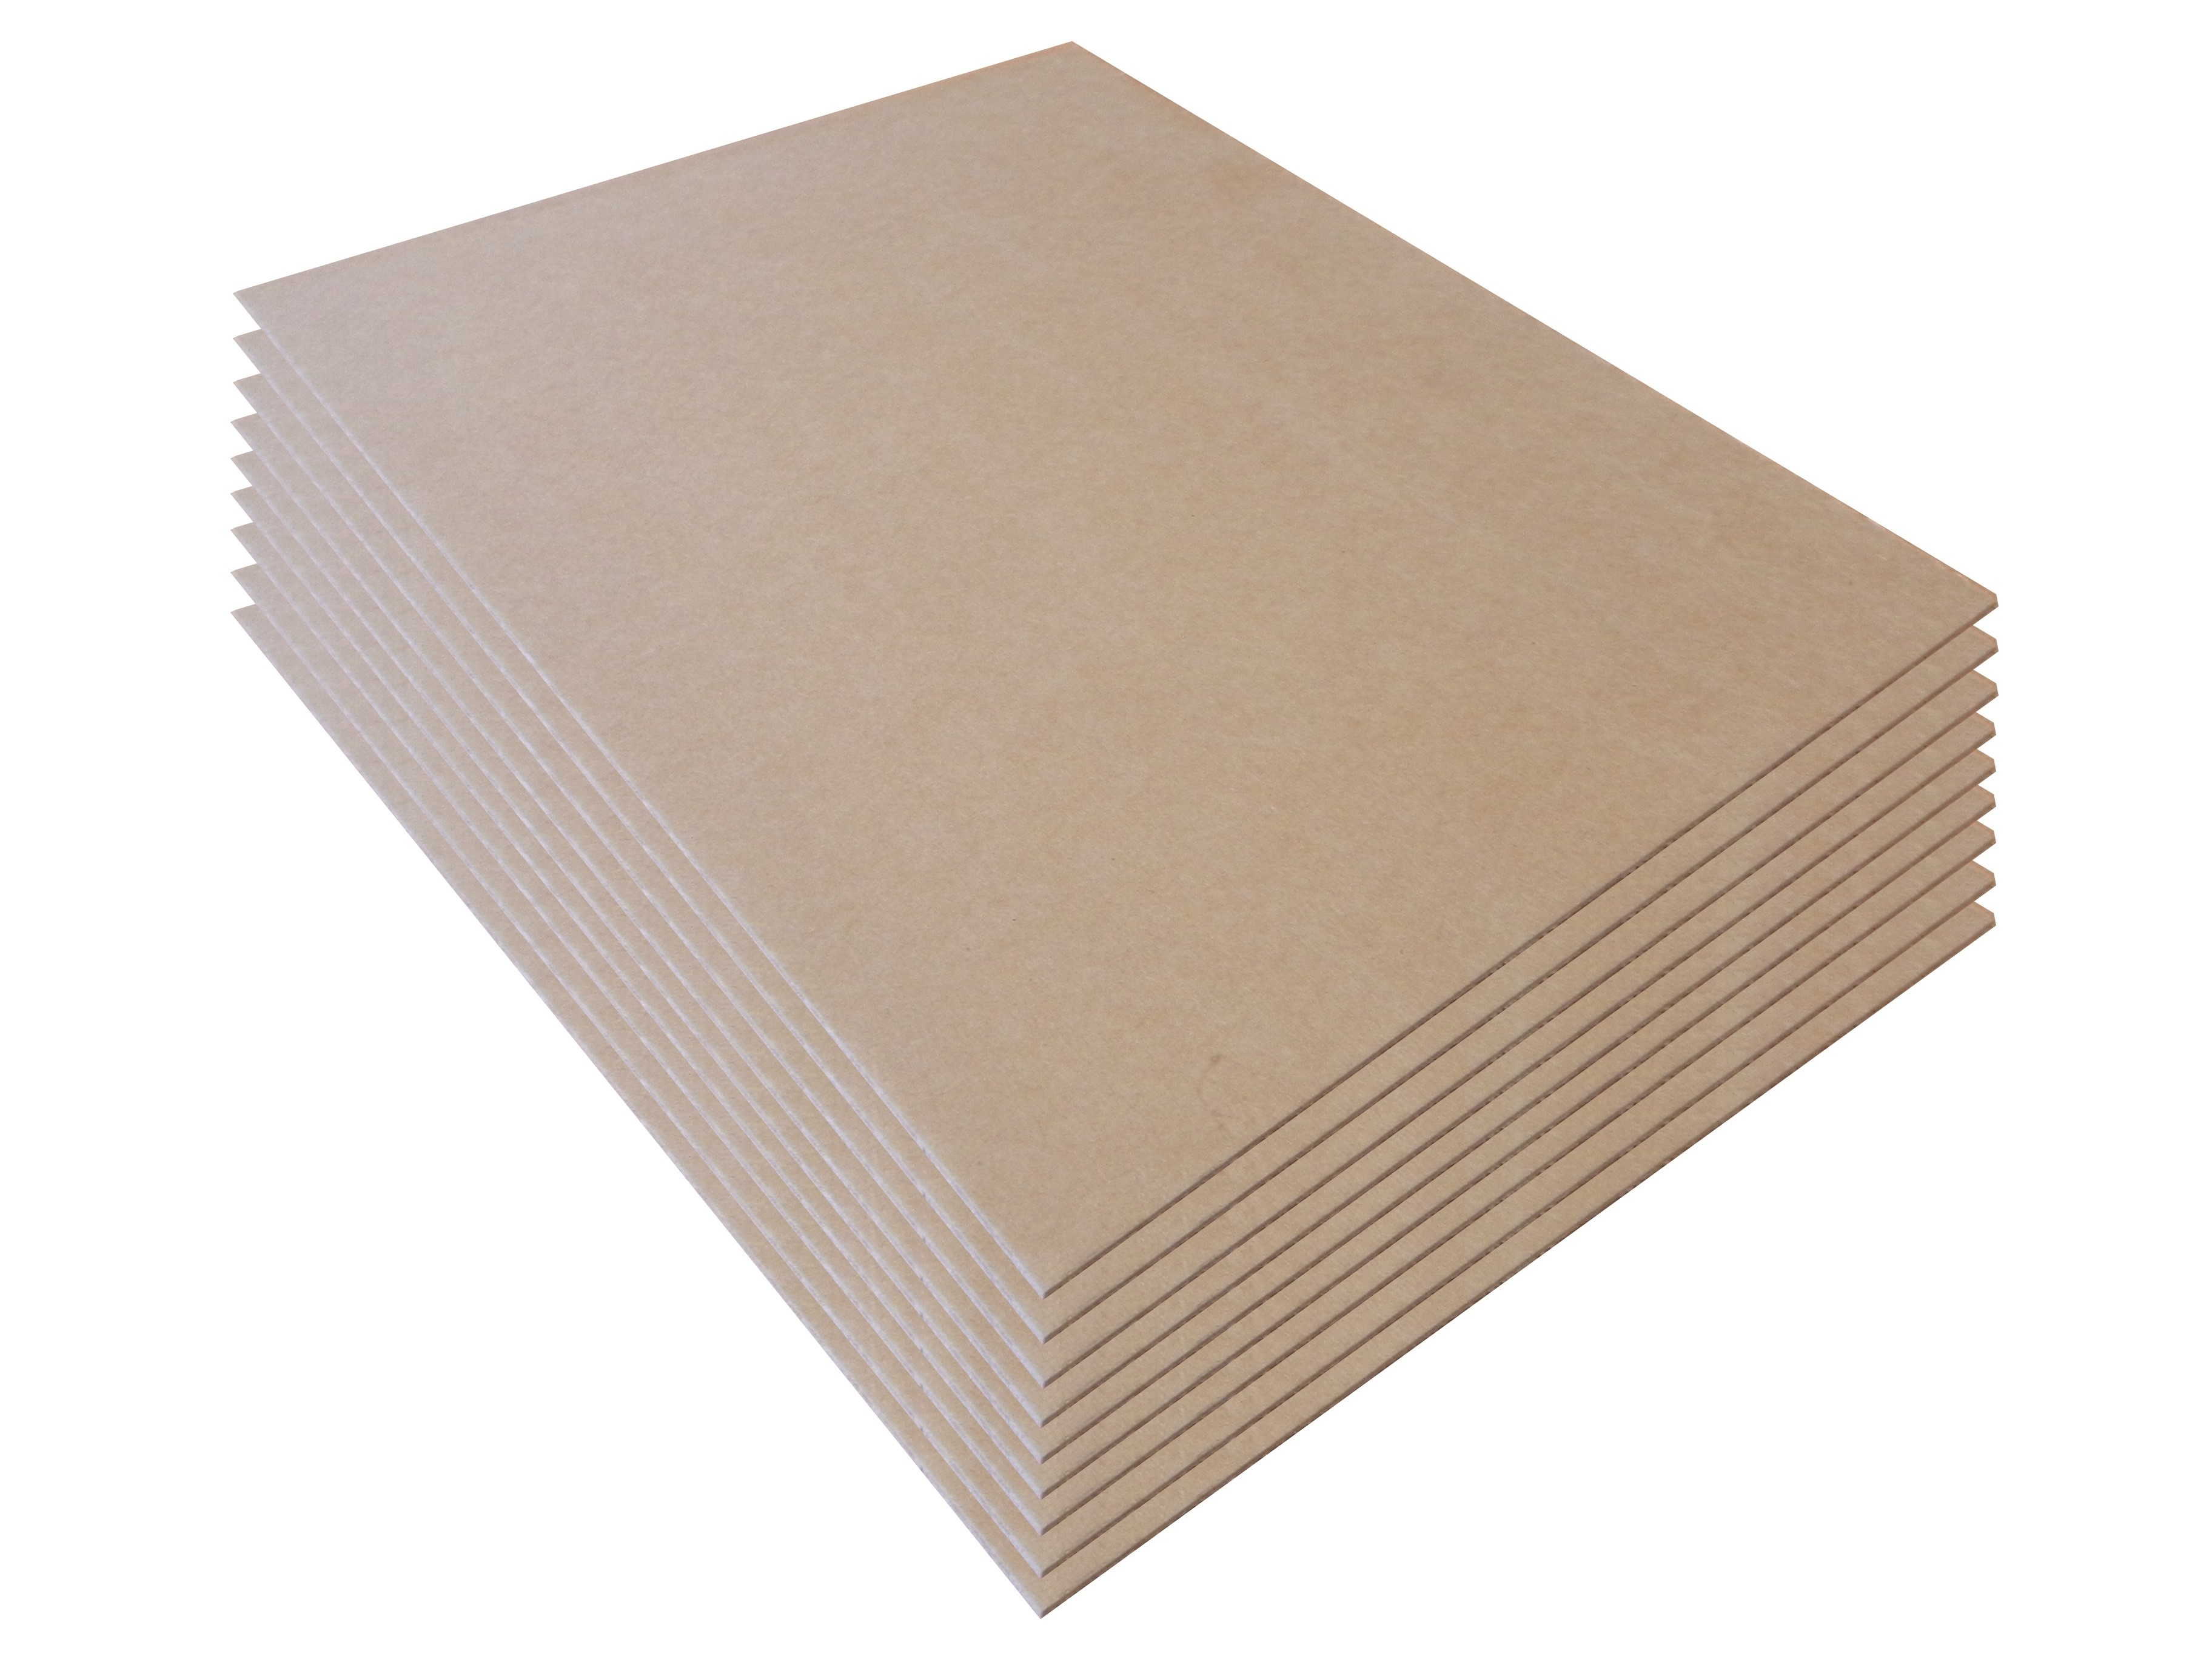 Backing Board 230 x 230mm - 10 pack